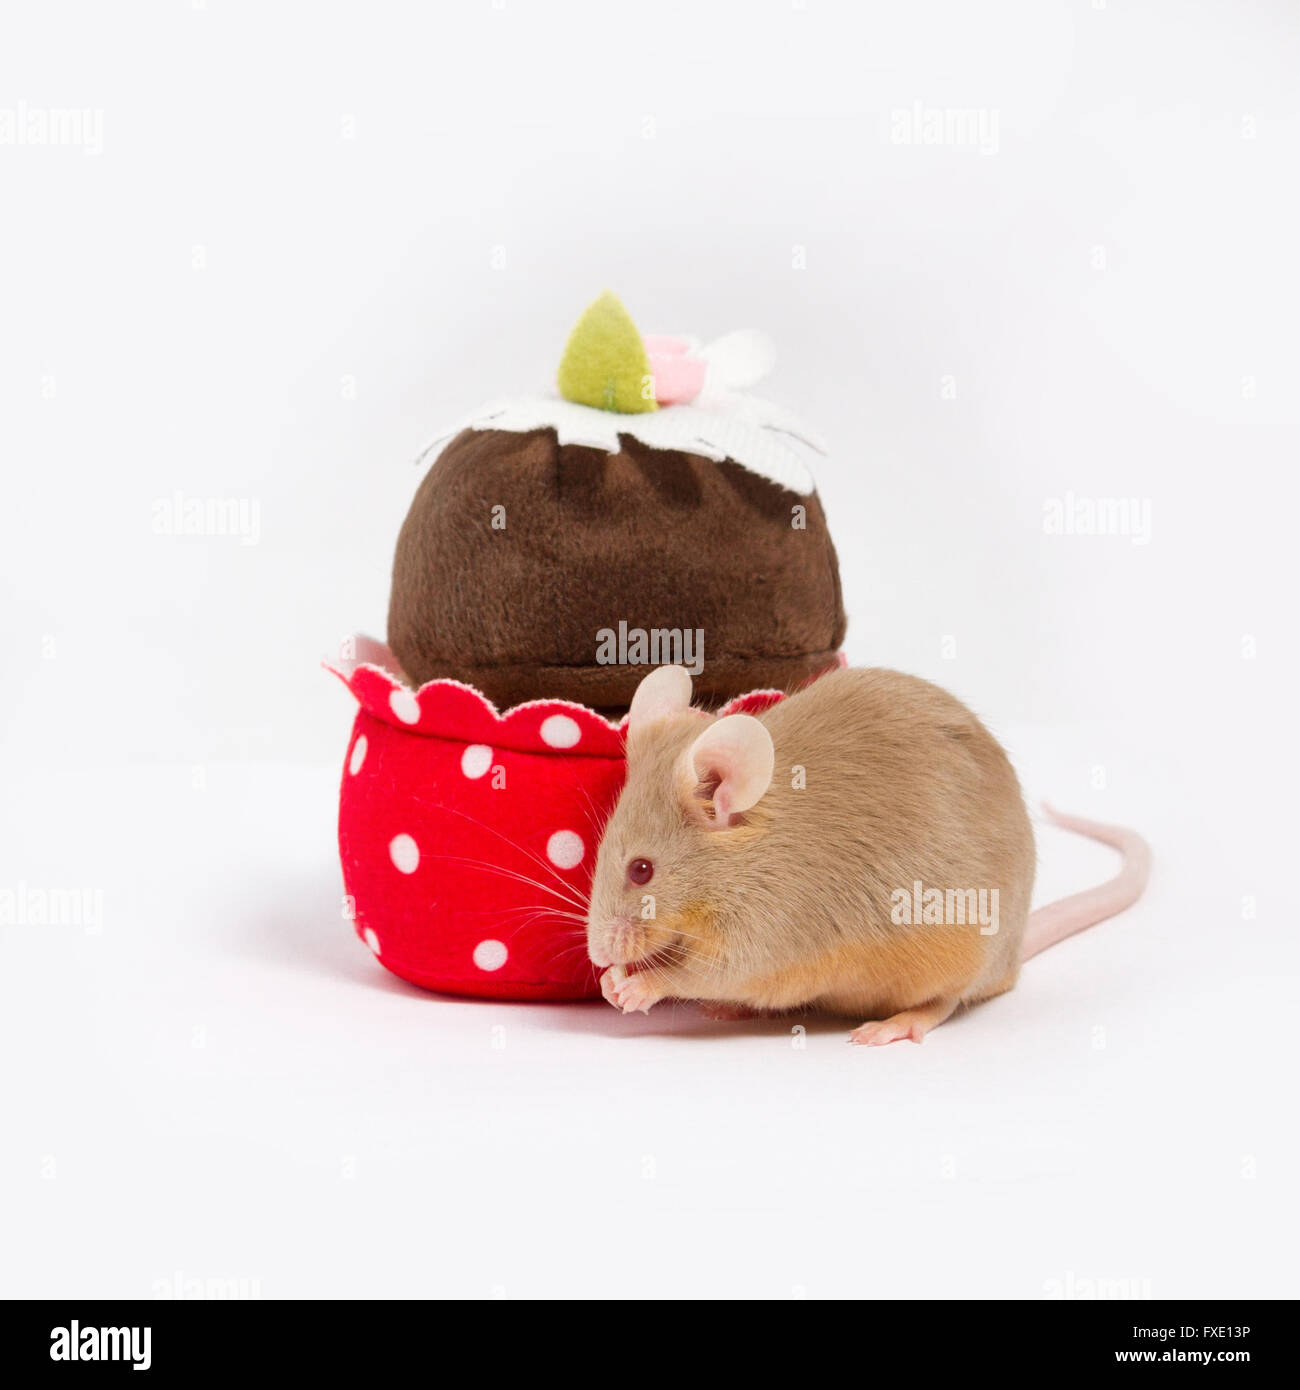 Curious domestic mouse explores plush cupcake. The mouse has bushing wiskers and cute little pink paws. The mouse is golden. Stock Photo